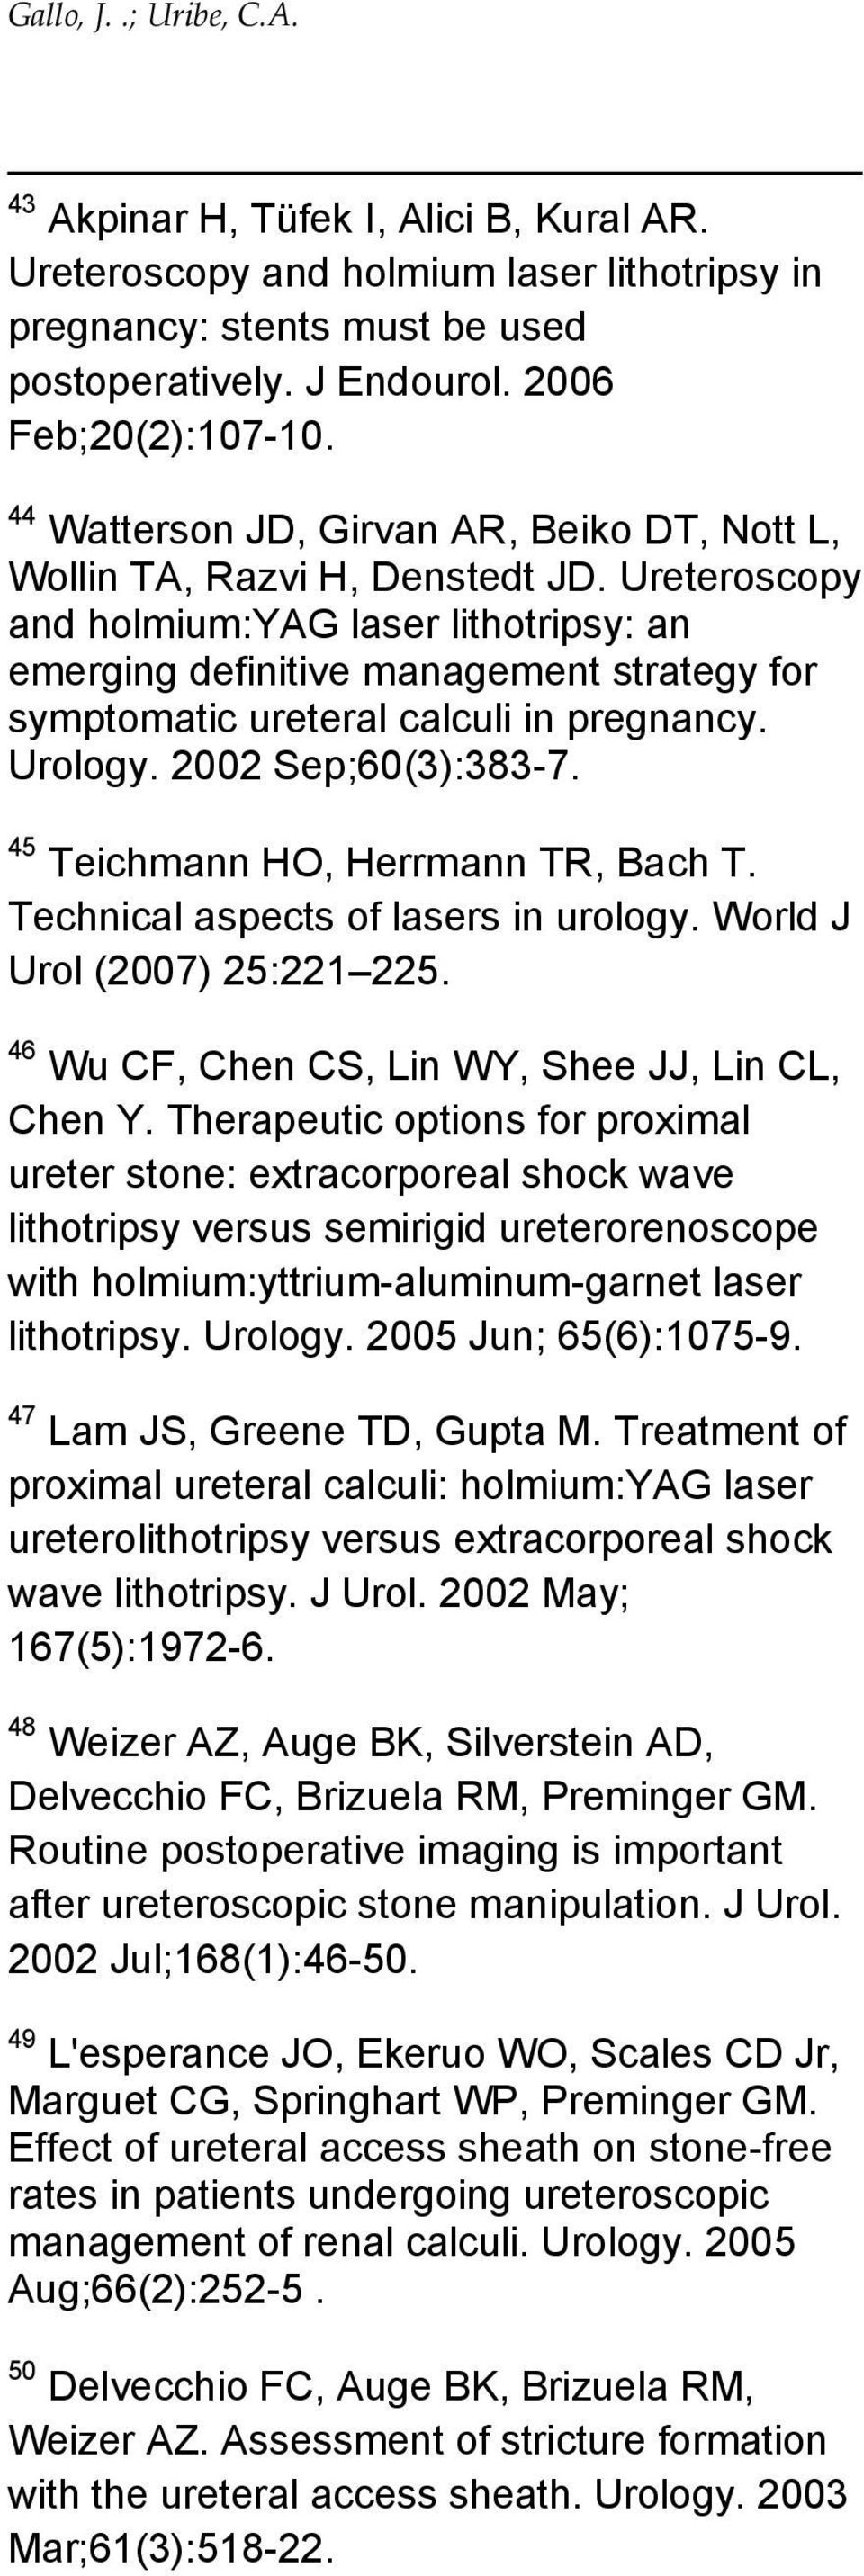 Ureteroscopy and holmium:yag laser lithotripsy: an emerging definitive management strategy for symptomatic ureteral calculi in pregnancy. Urology. 2002 Sep;60(3):383-7.